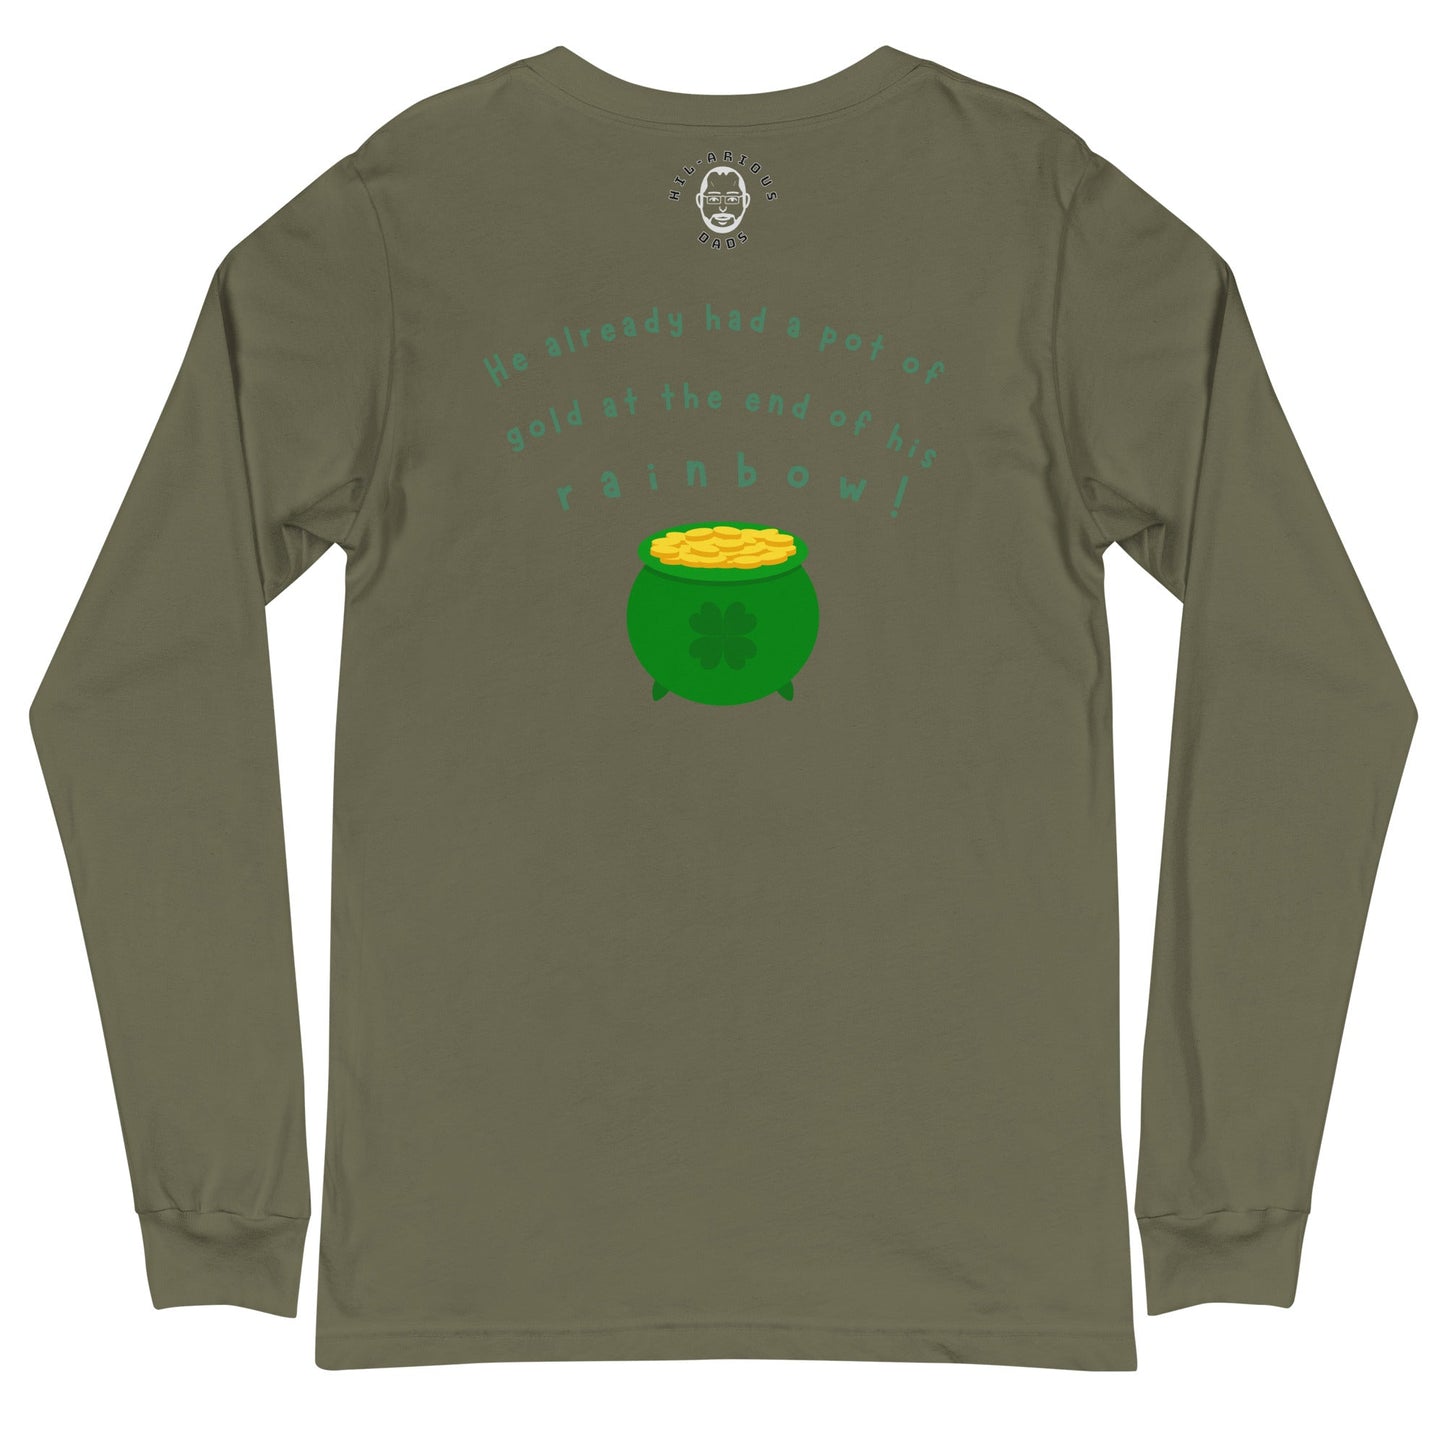 Why did the leprechaun turn down a bowl of soup?-Long Sleeve Tee - Hil-arious Dads